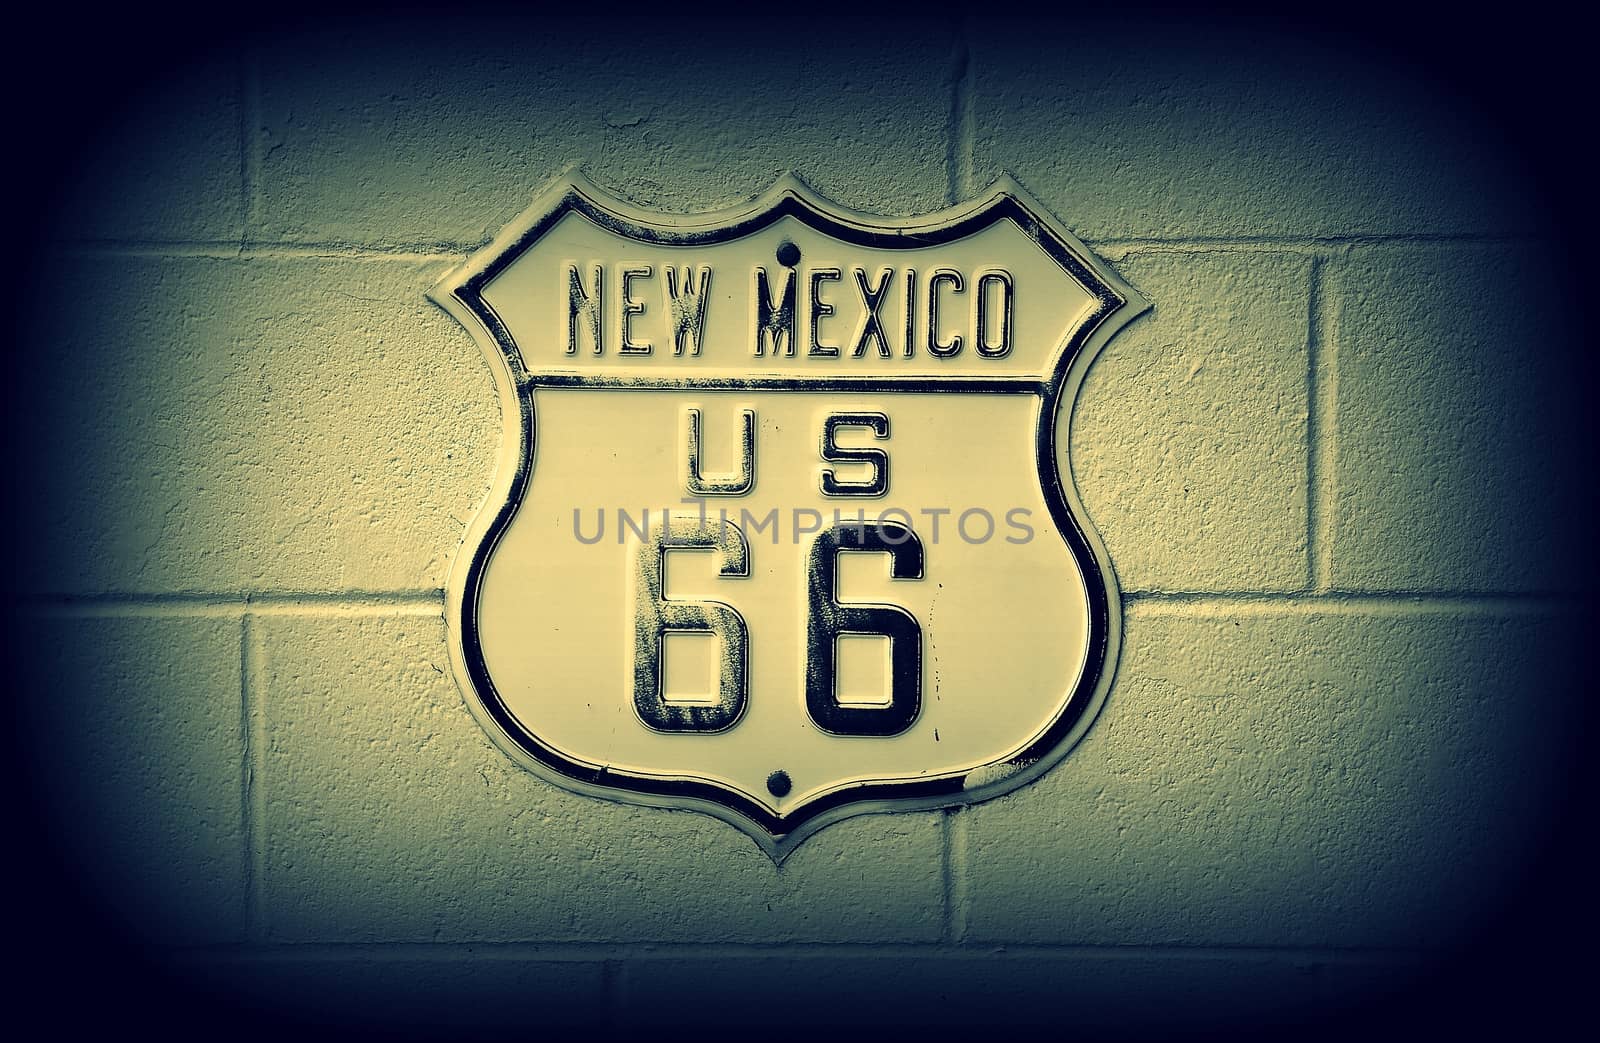 Historic U.S. old Route 66 sign in New Mexico.